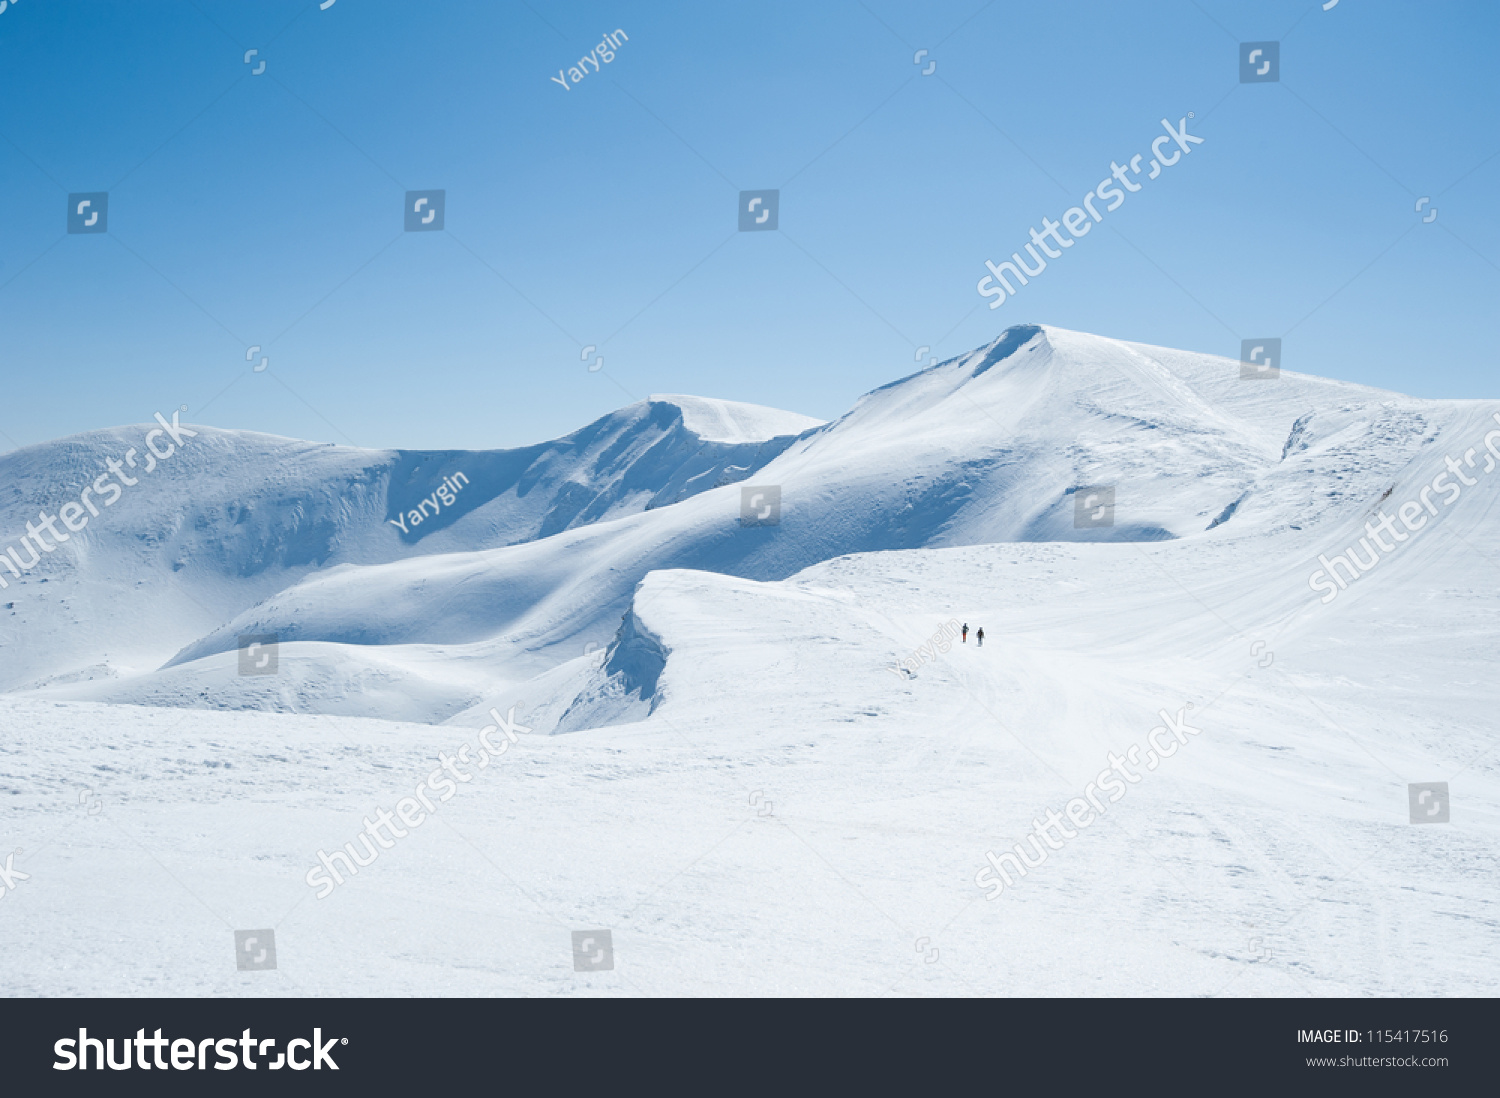 Winter snow covered mountain peaks in Europe. Great place for winter sports #115417516